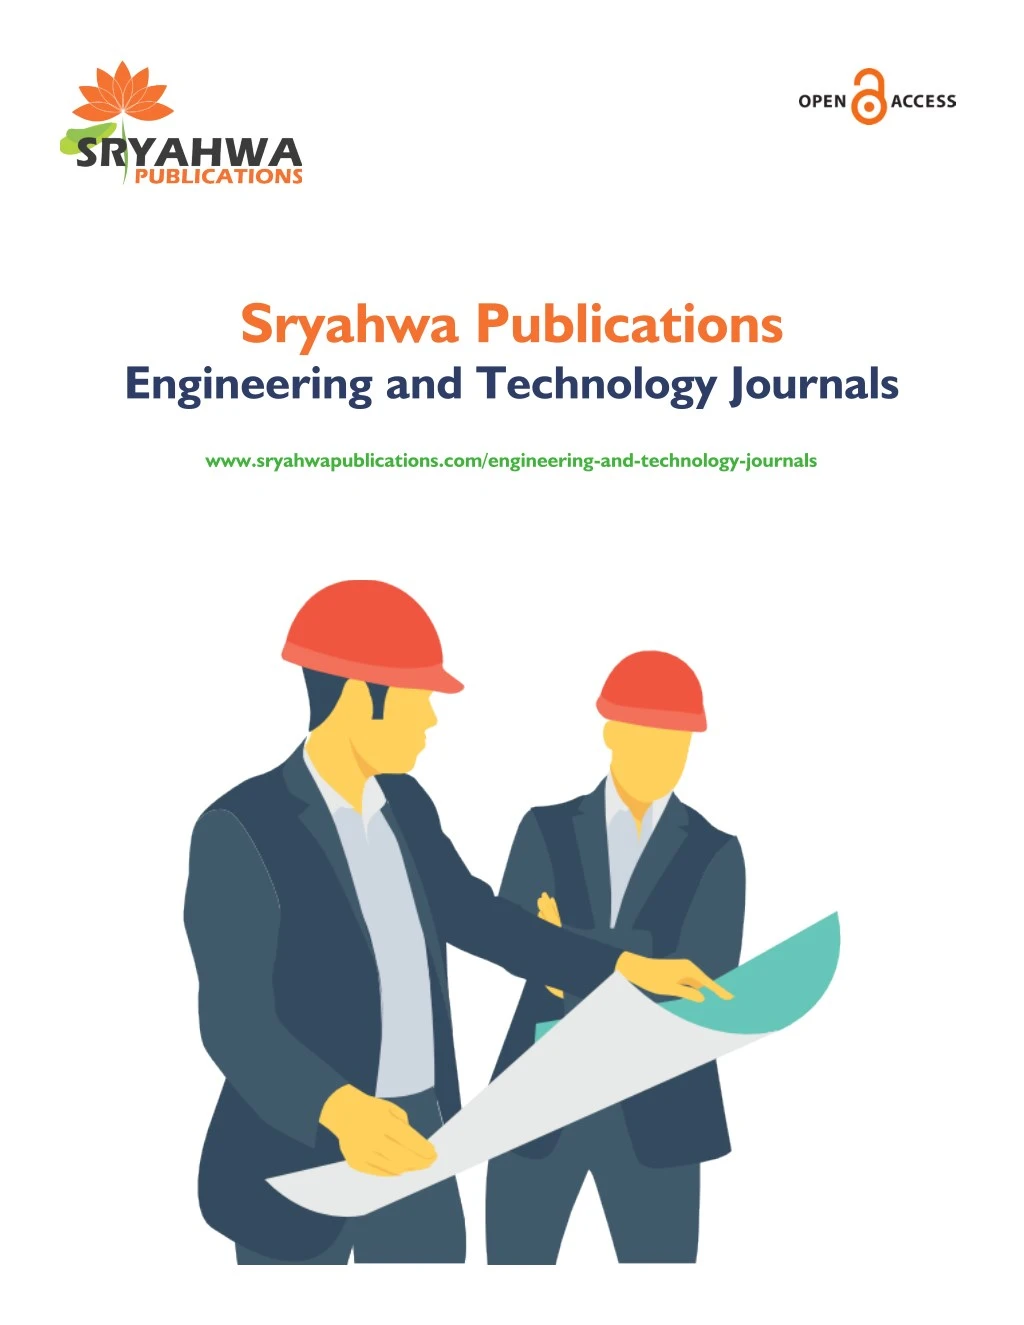 sryahwa publications engineering and technology